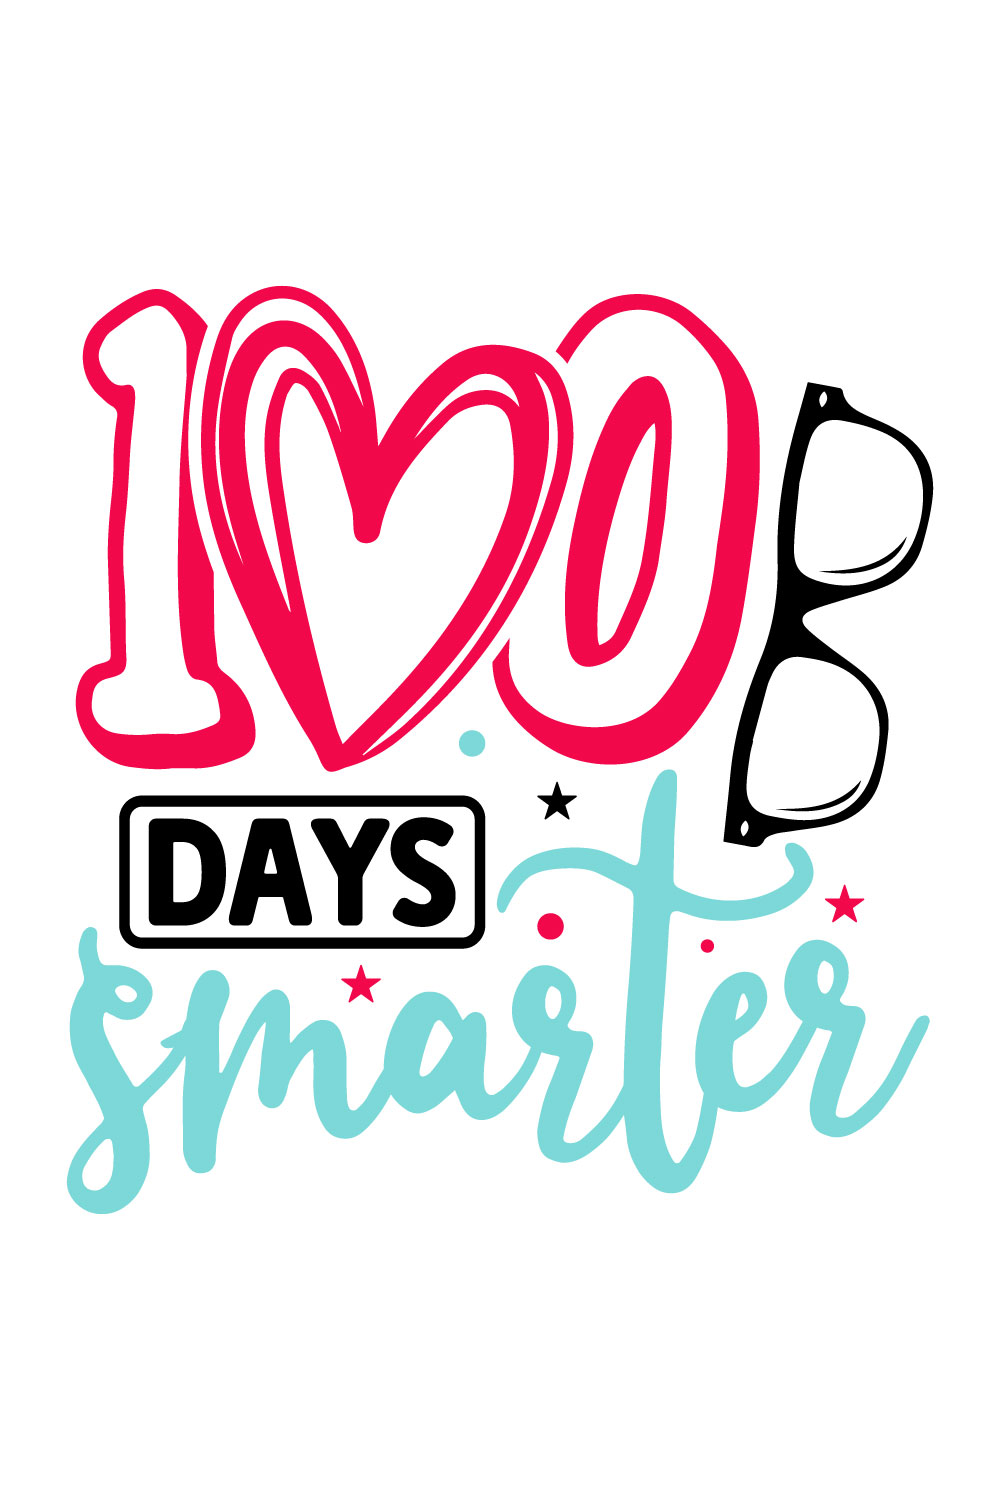 Image for prints with enchanting inscription 100 Days Smarter